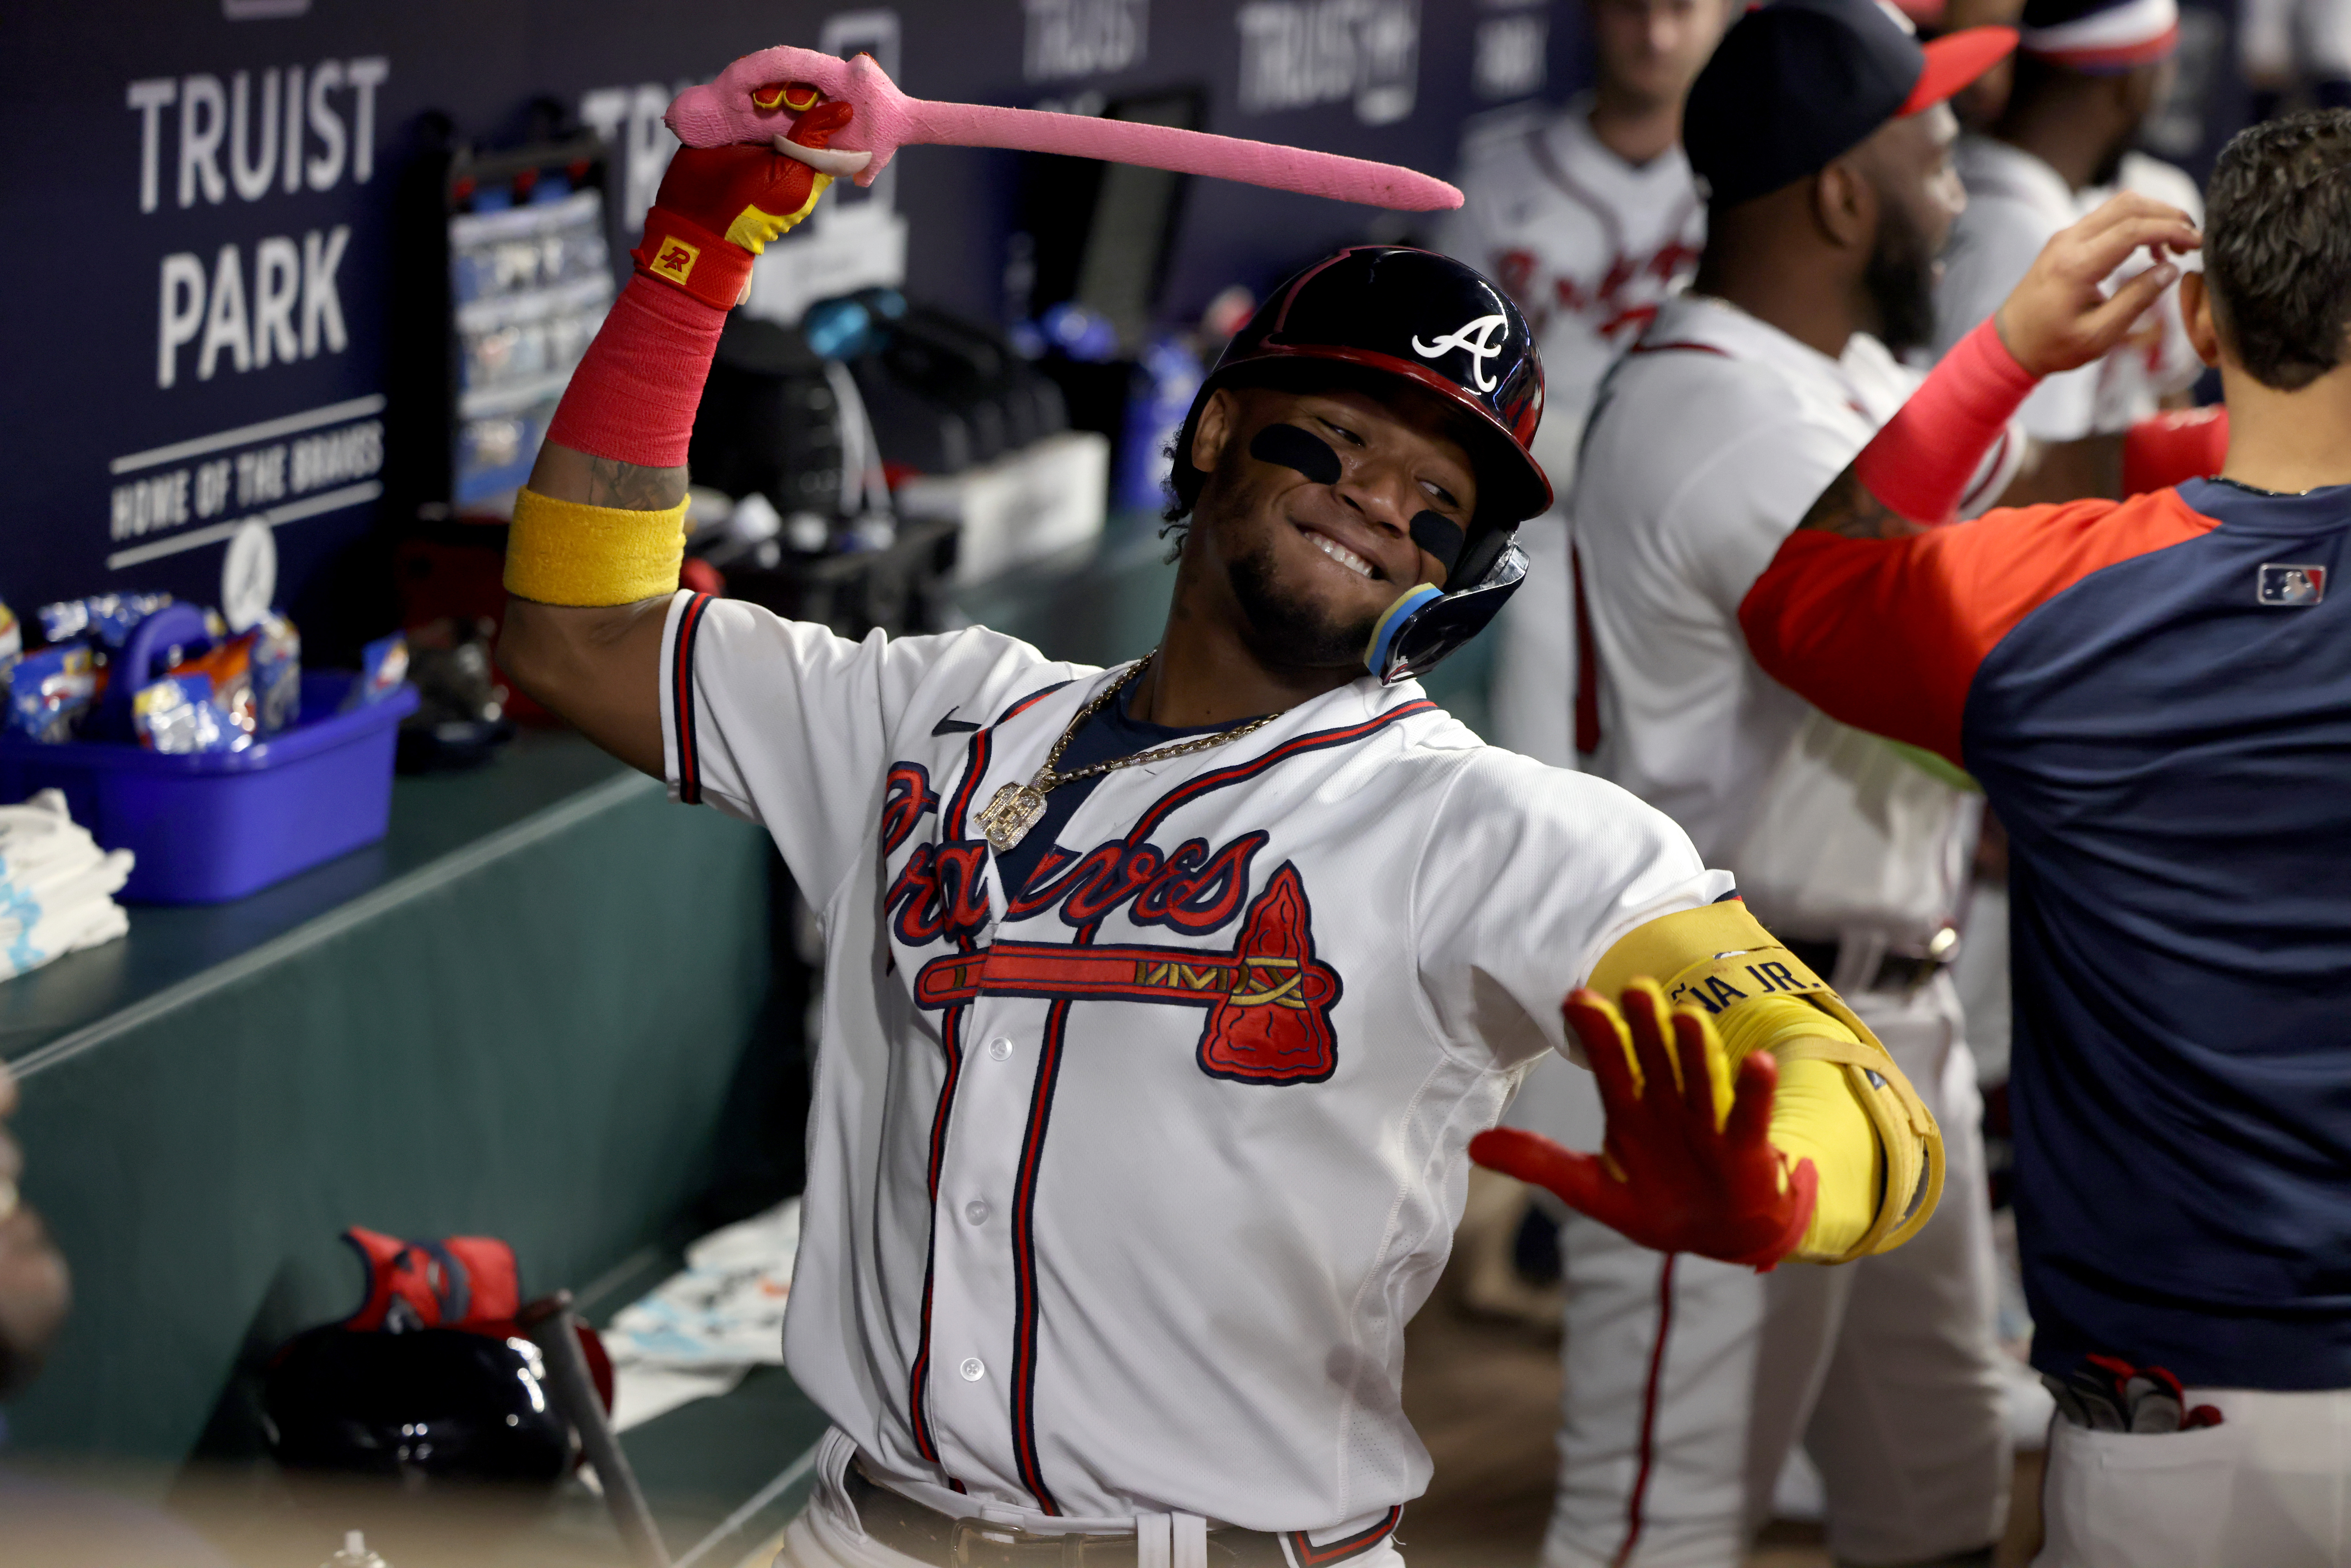 Photos: Ronald Acuna leads Braves to another win over Phillies